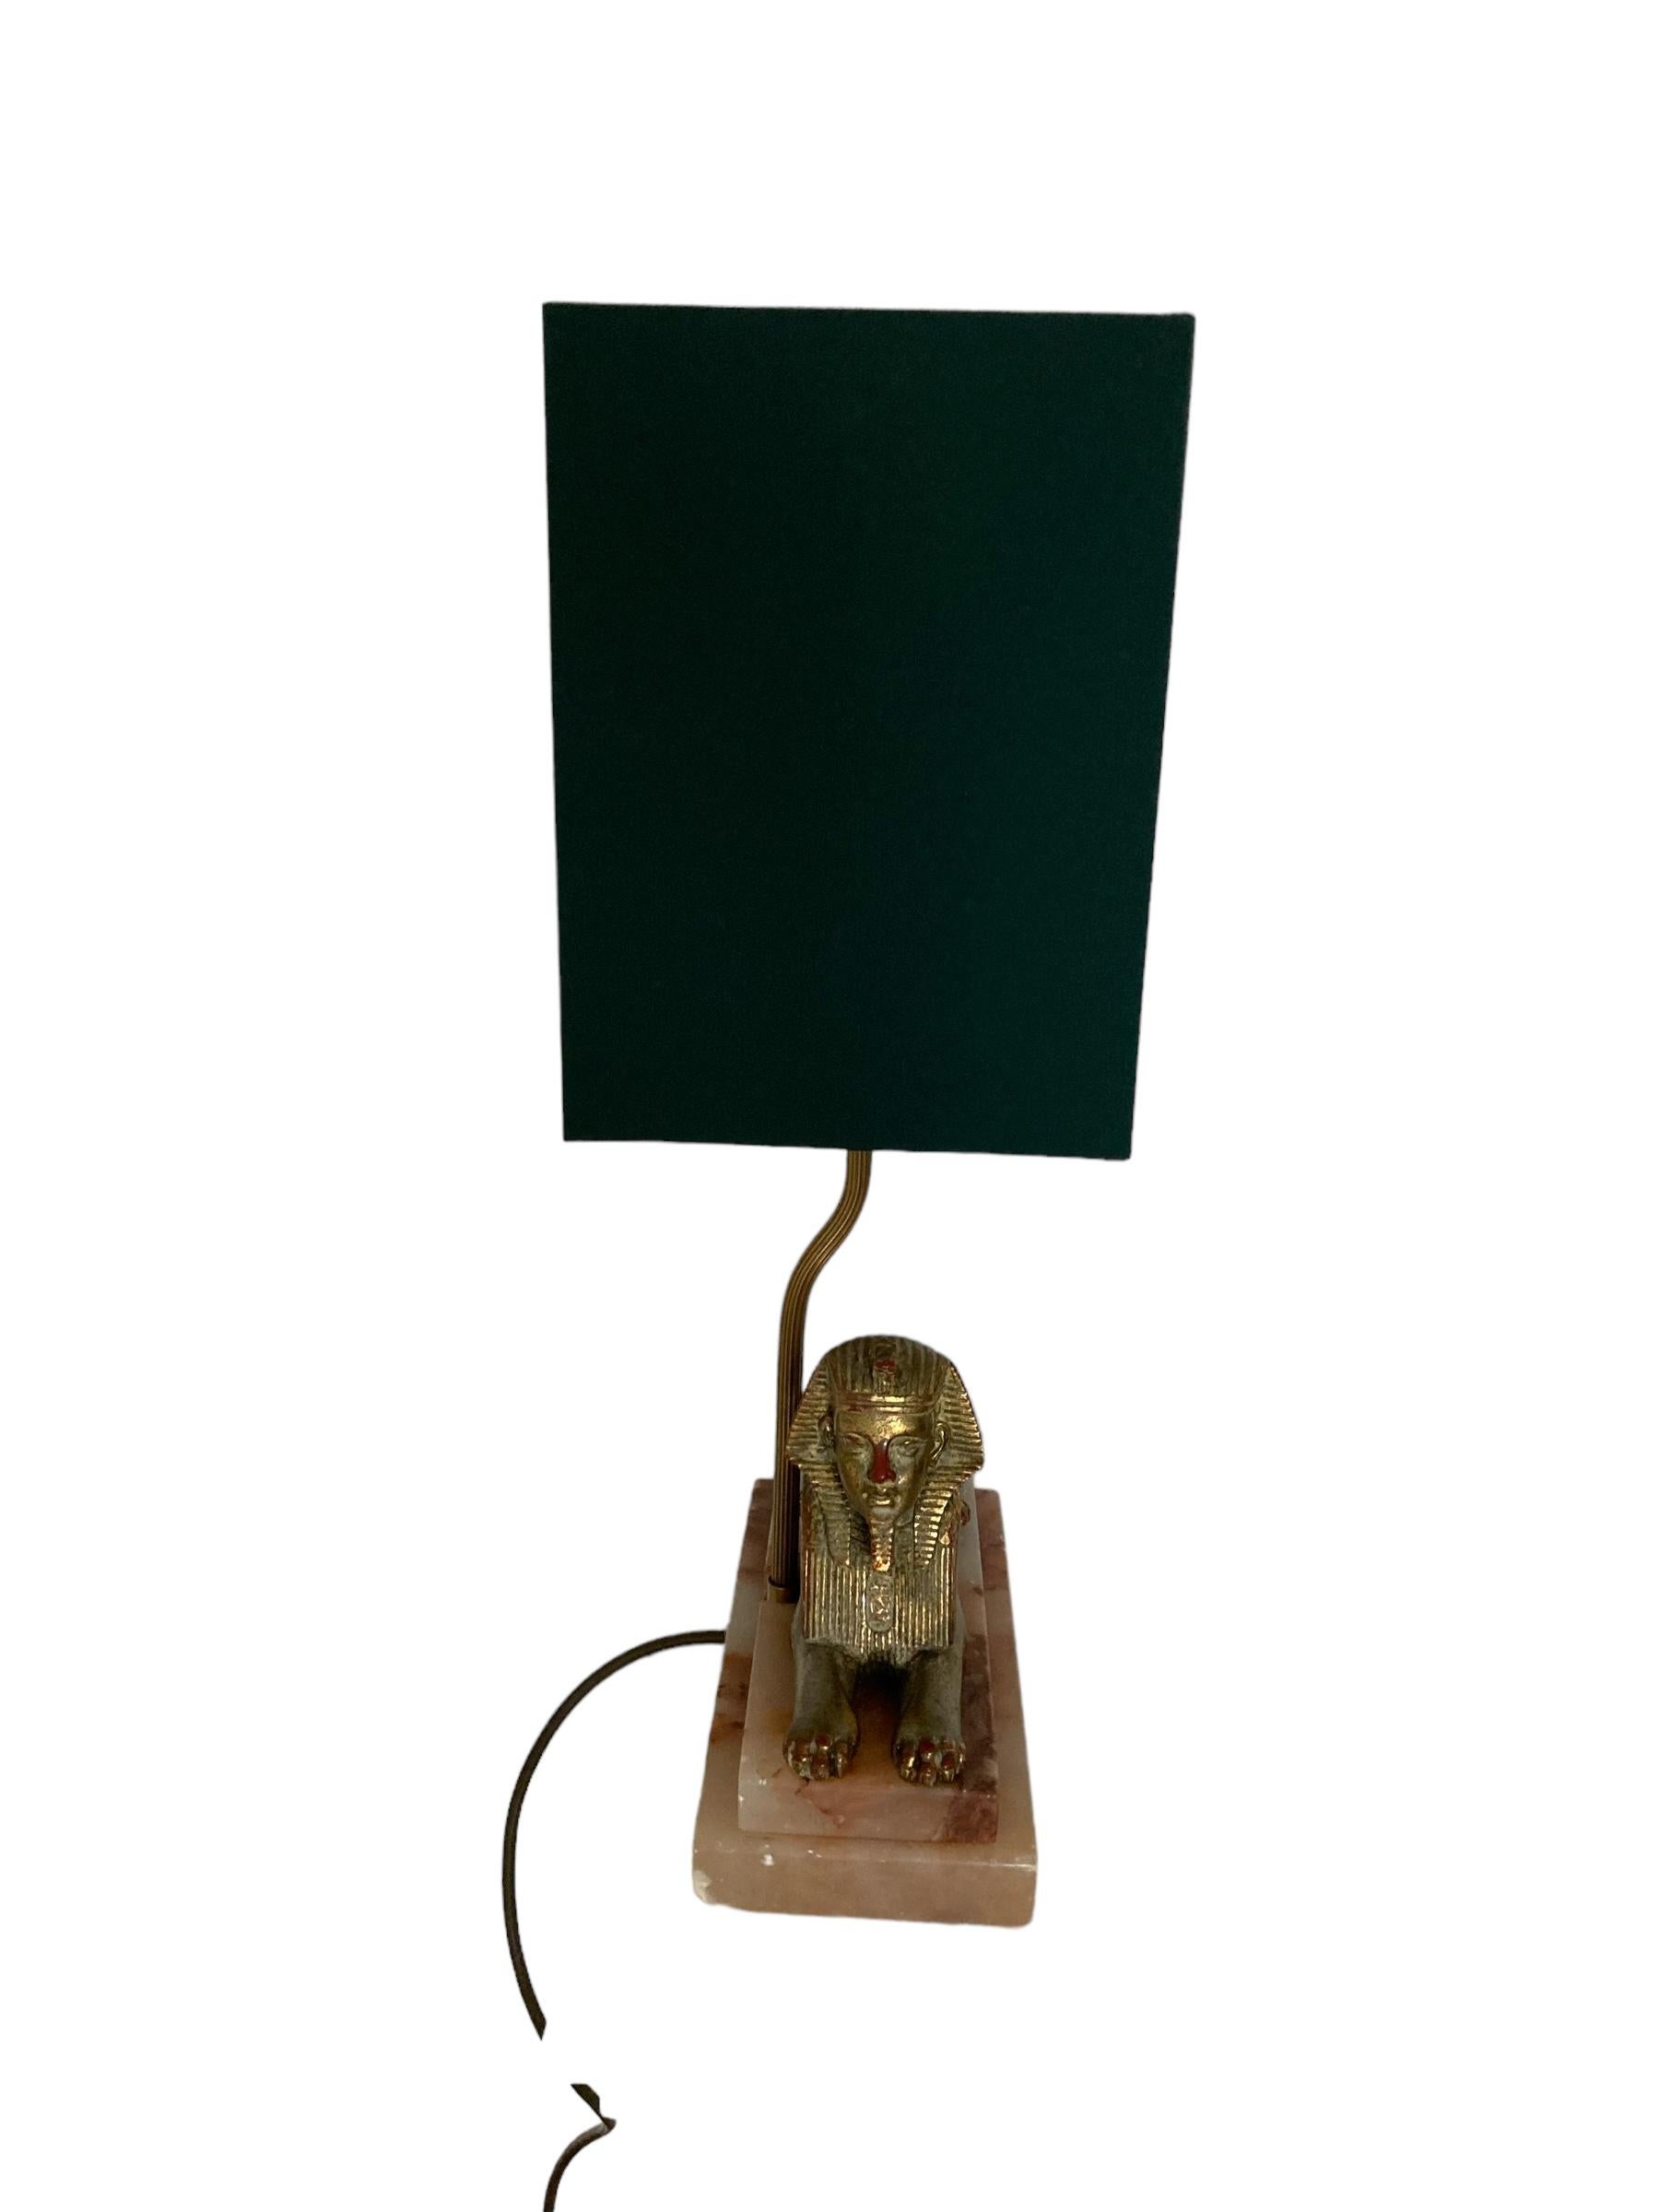 A Pair of Art Deco Egytian Sphinx Table Lamps on a Marble Base Dark Green Shades For Sale 5